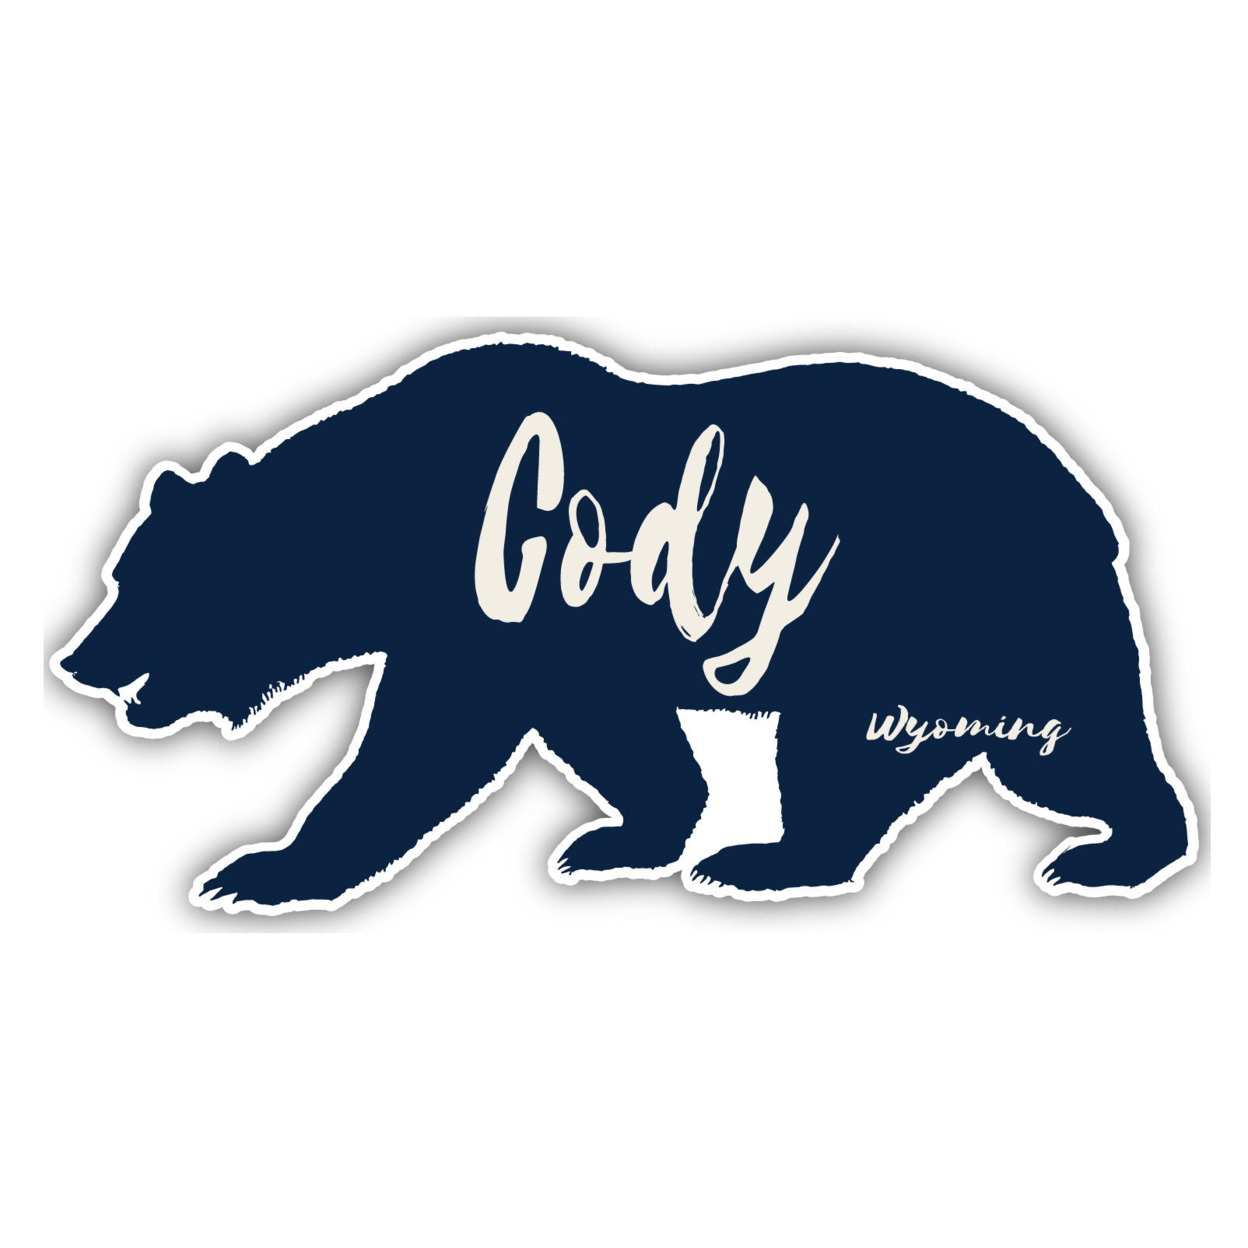 Cody Wyoming Souvenir Decorative Stickers (Choose Theme And Size) - 4-Pack, 6-Inch, Bear